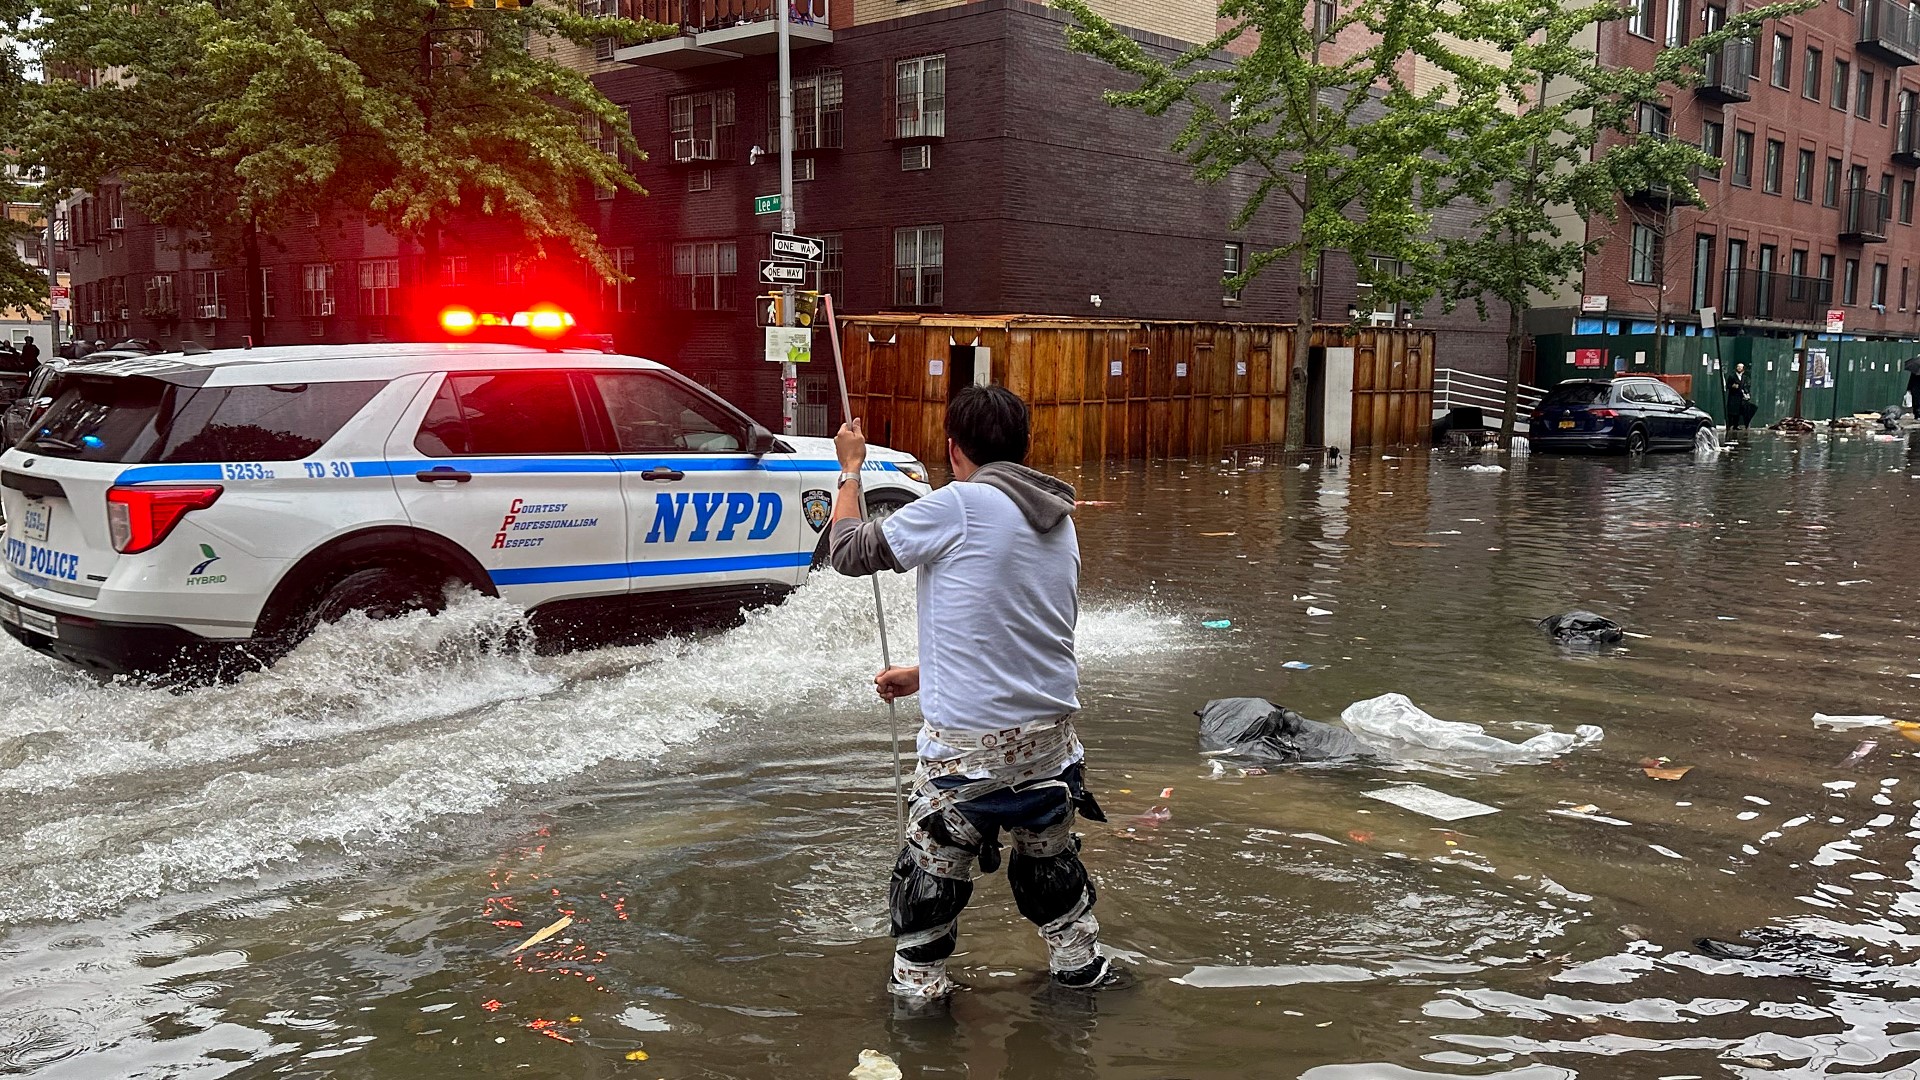 A potent rush-hour rainstorm swamped the New York metropolitan area on Friday.